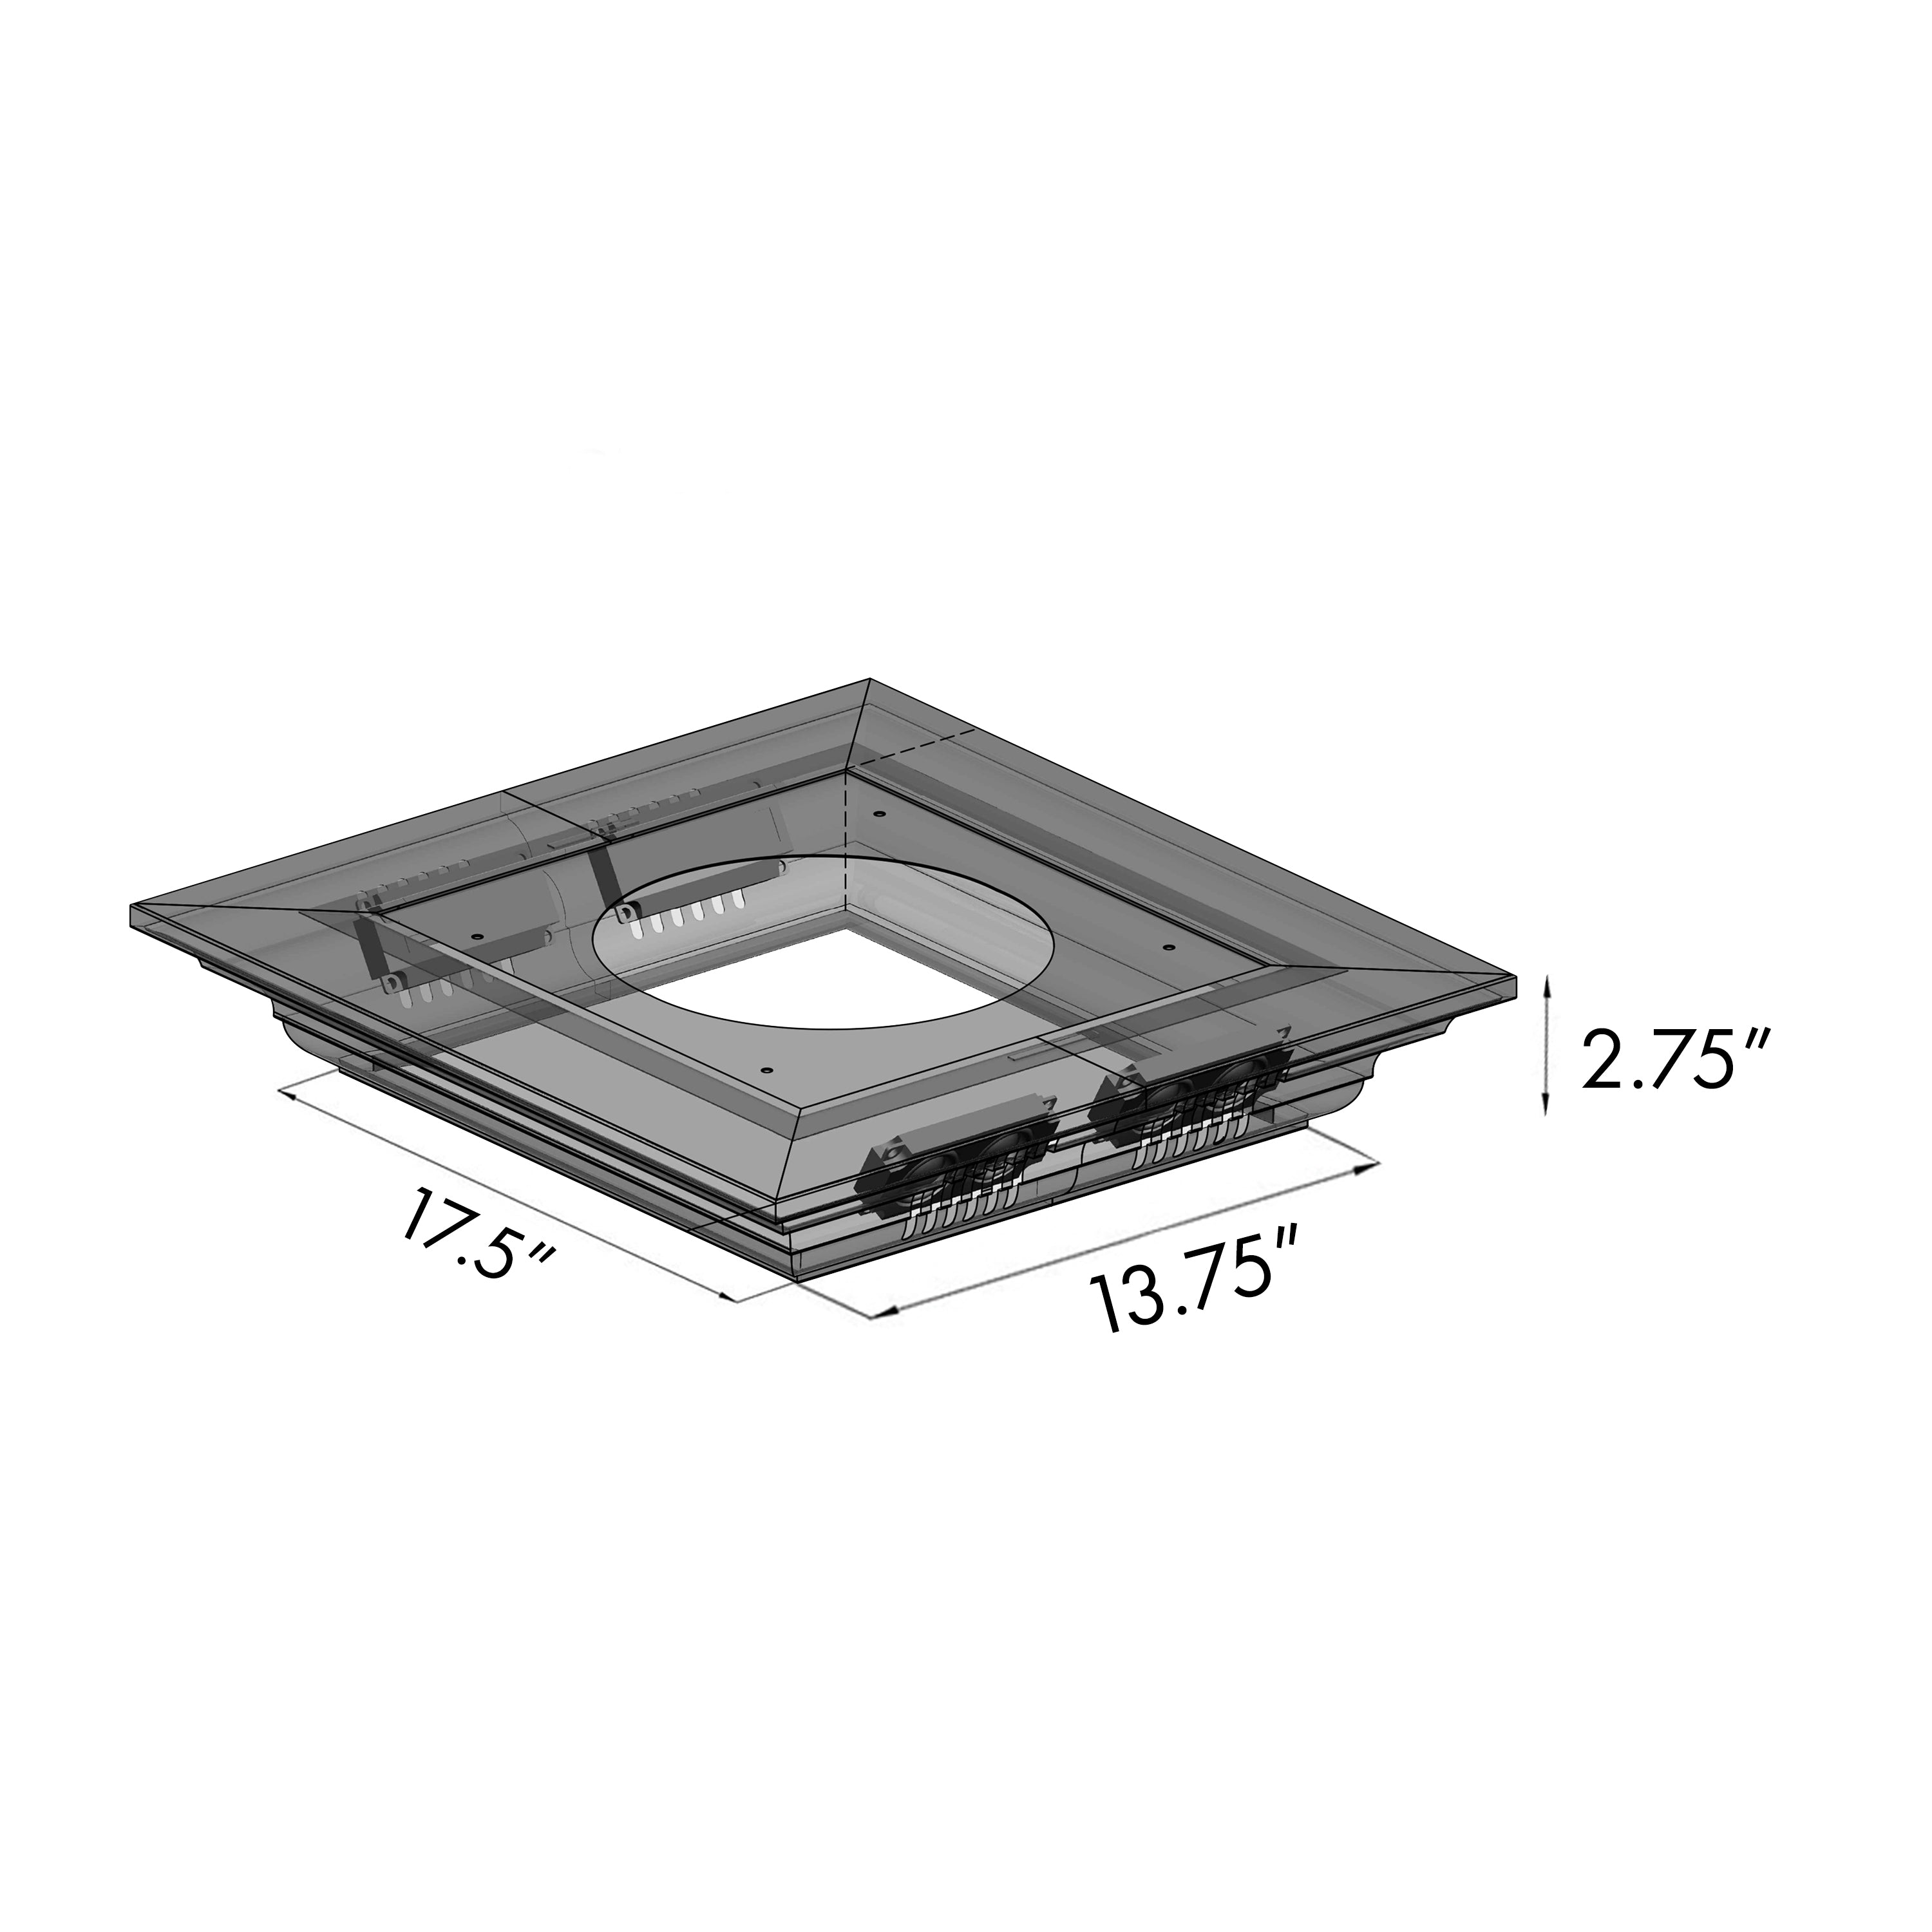 36" ZLINE CrownSound® Ducted Vent Island Mount Range Hood in Stainless Steel with Built-in Bluetooth Speakers (KE2iCRN-BT-36)